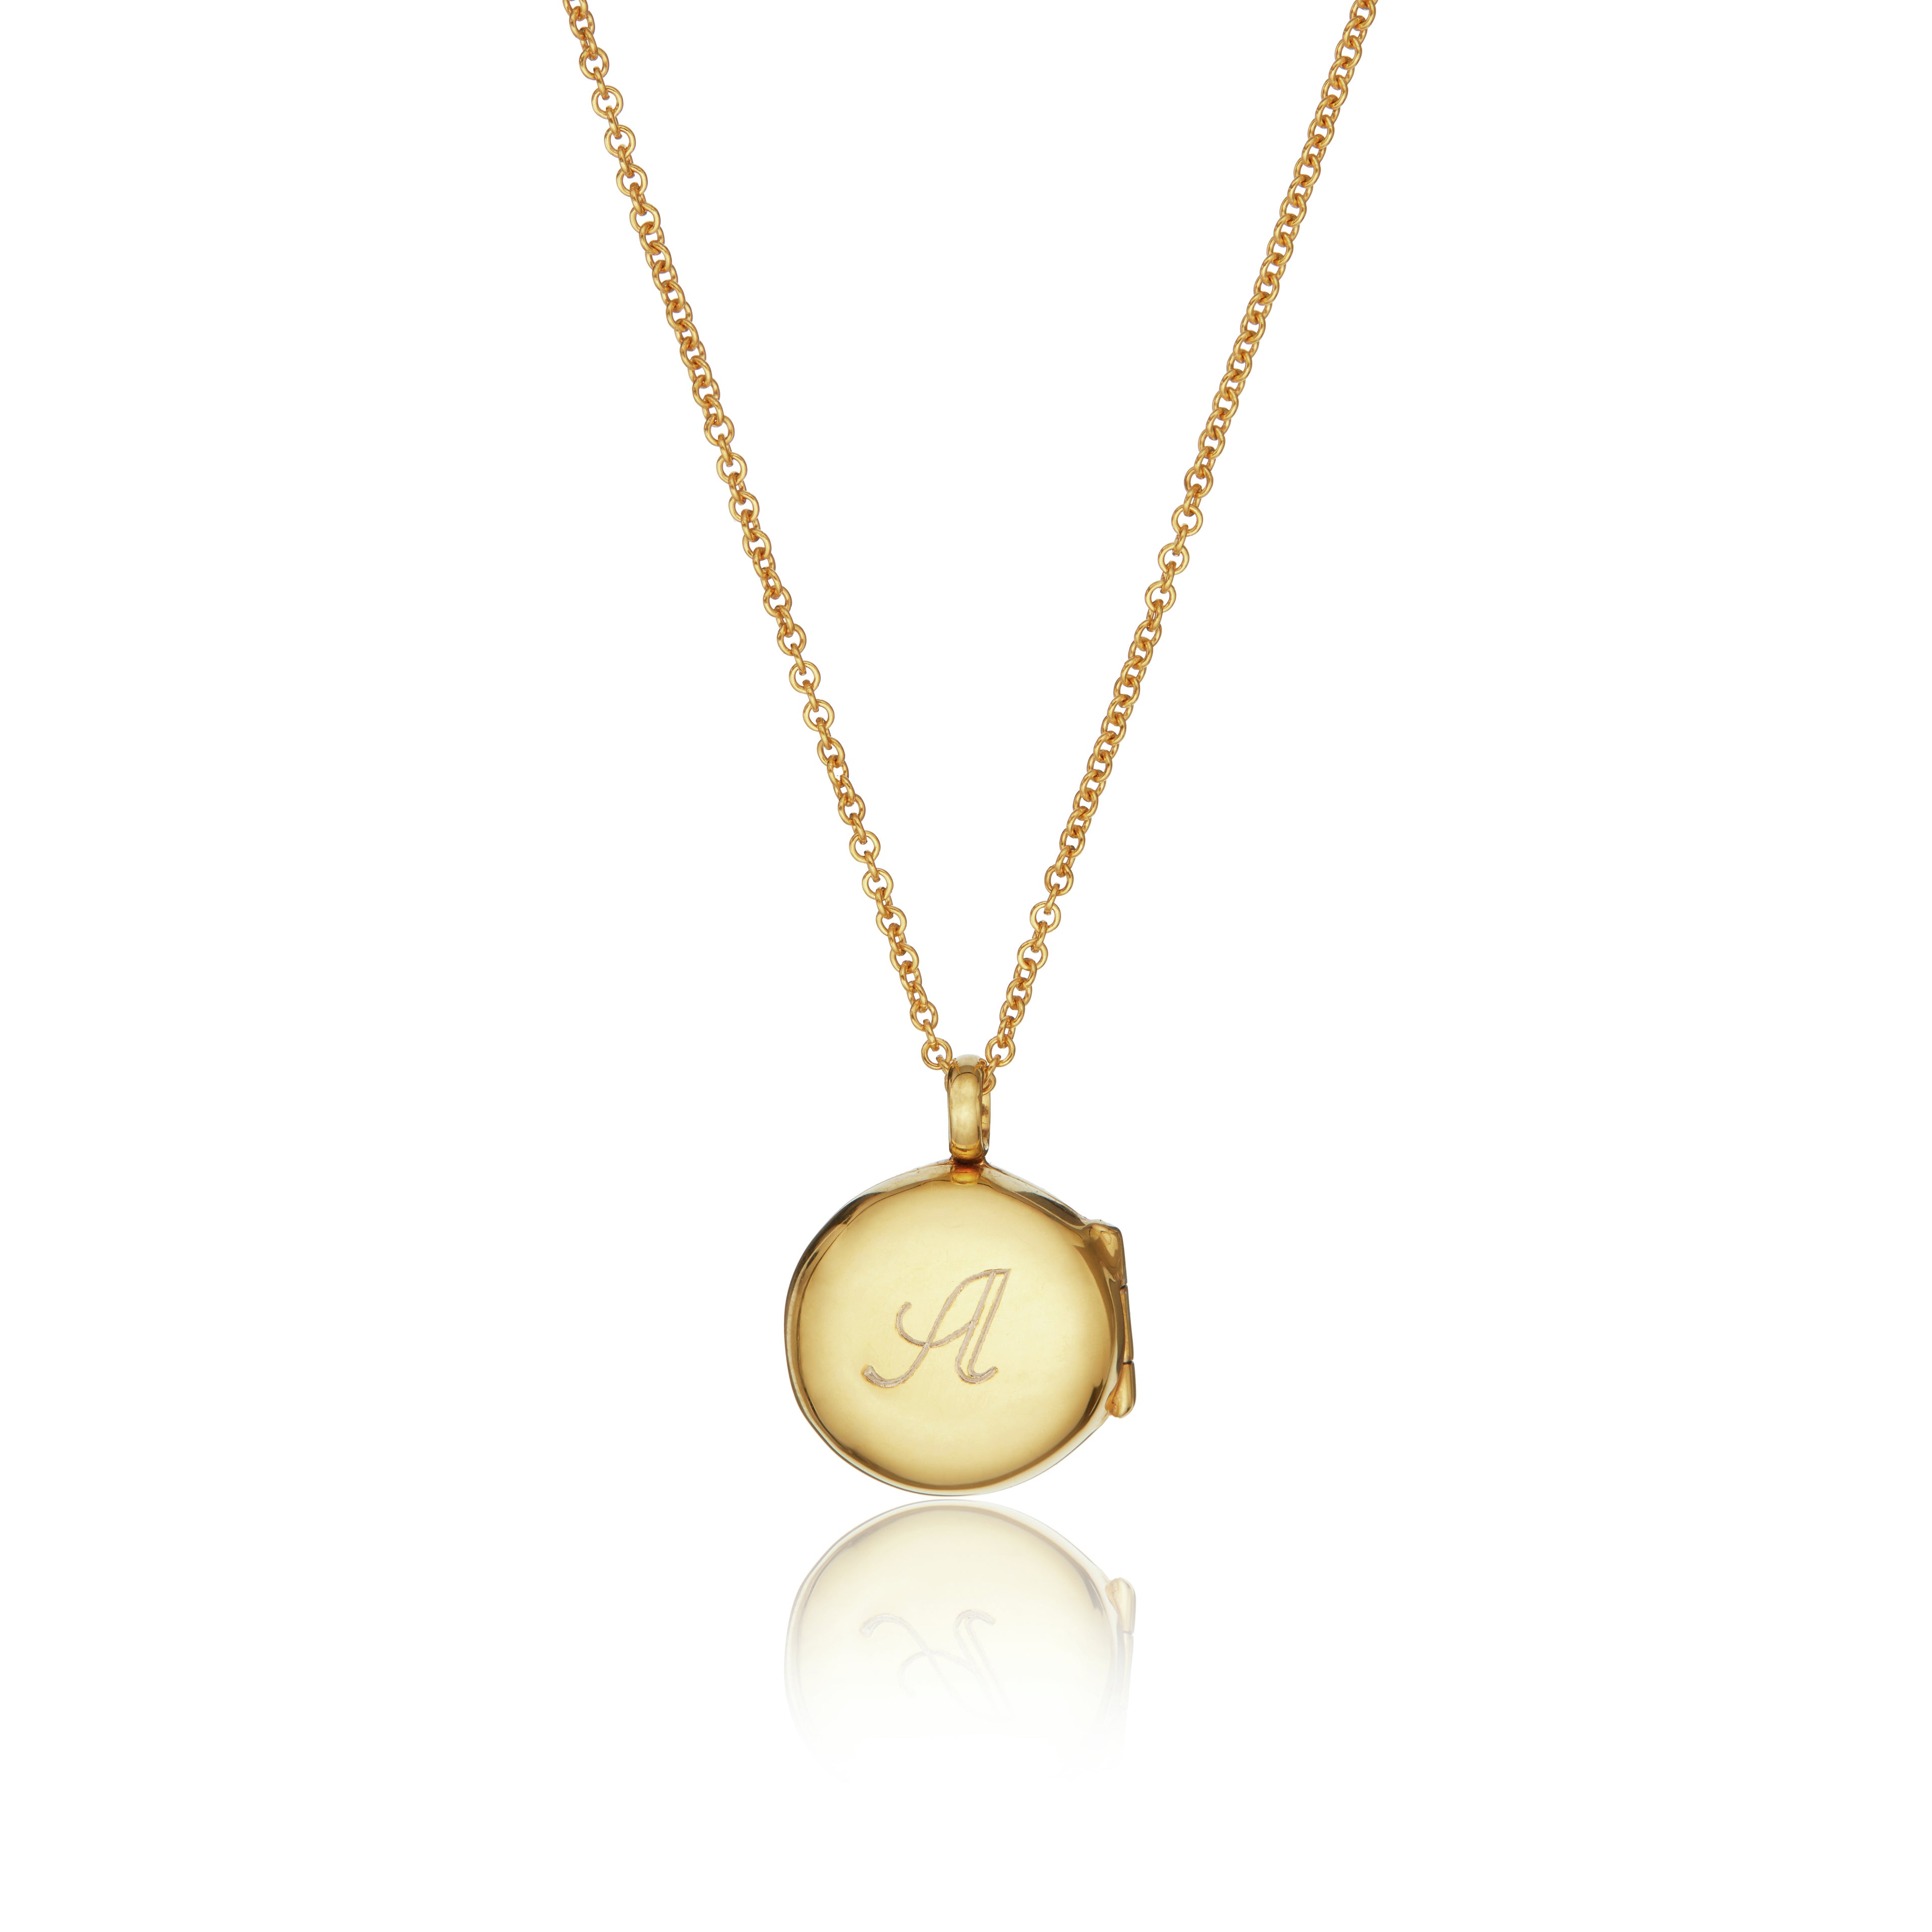 Gold small round diamond locket necklace with the letter 'A' engraved on a white background